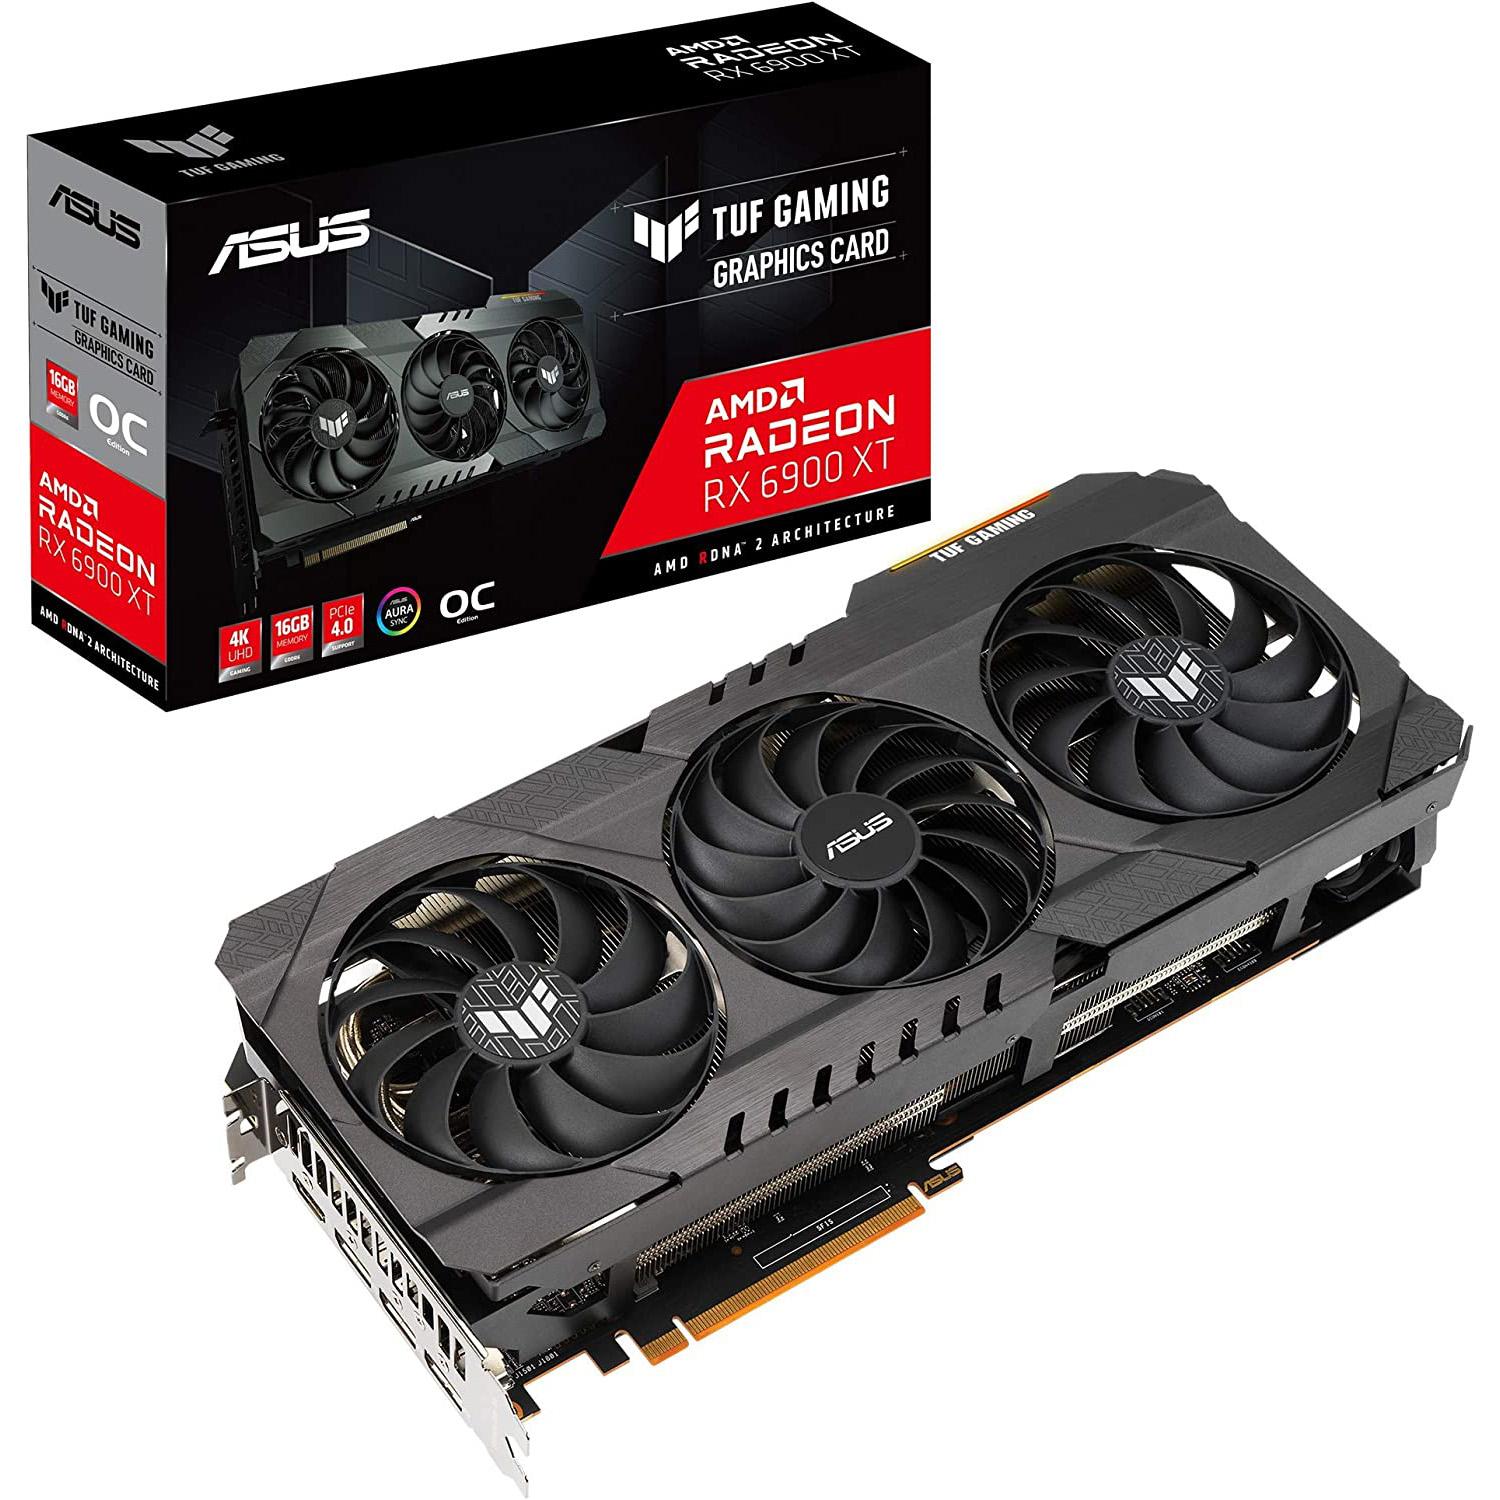 ASUS TUF Gaming AMD Radeon RX 6900 XT OC Graphics Card for $729.99 Shipped